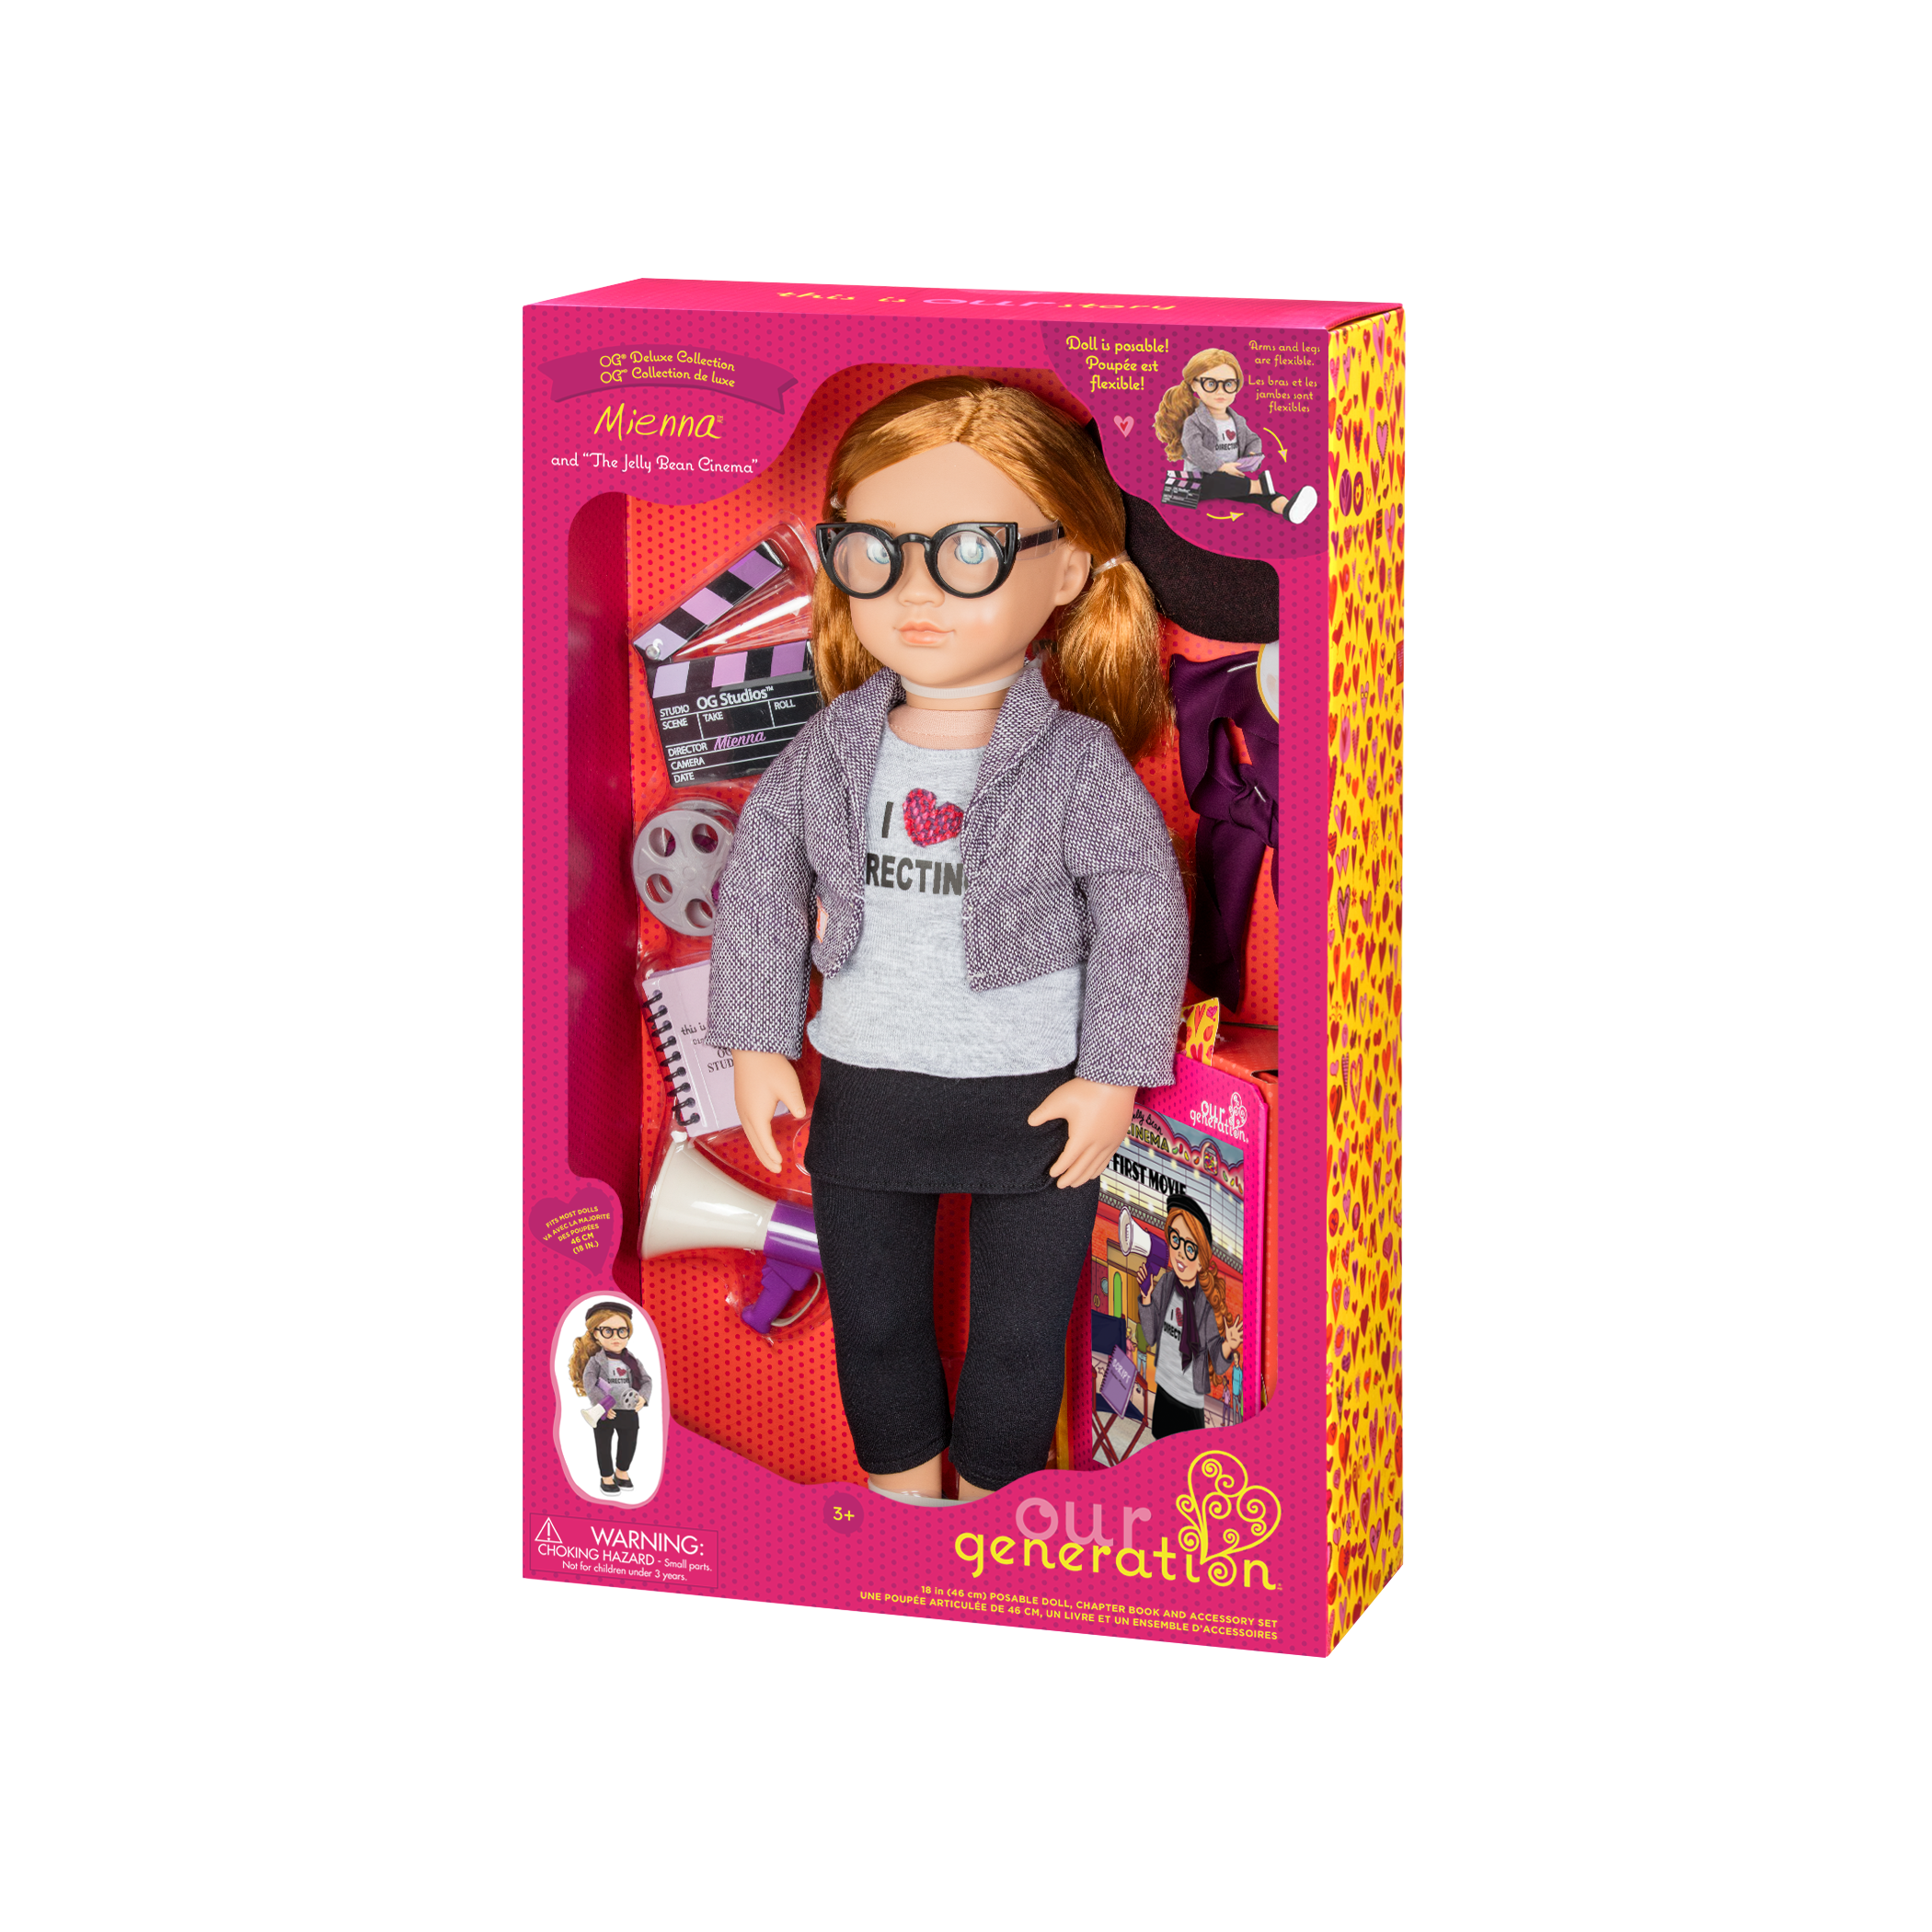 Mienna Deluxe 18-inch Movie Doll in packaging